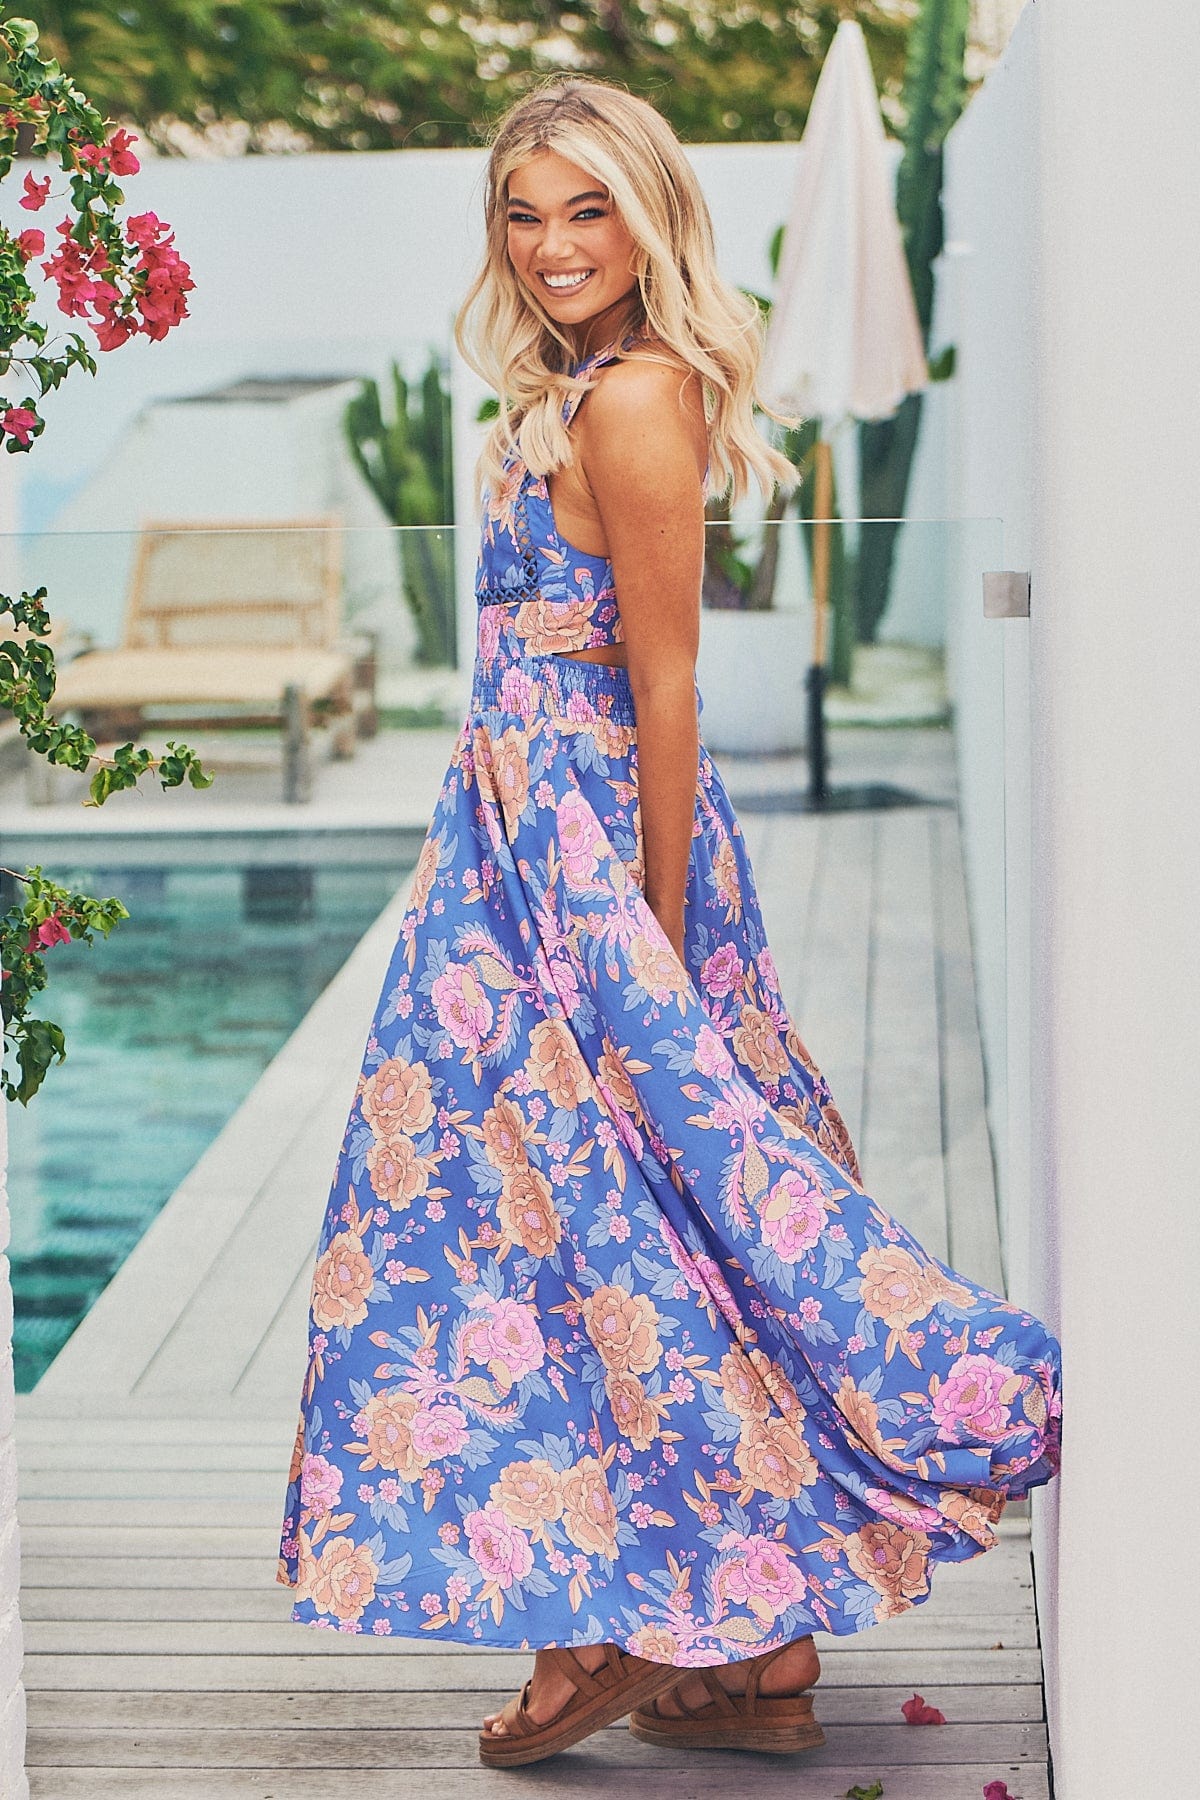 Look like an ethereal goddess in the Endless Maxi Dress! Featuring a crocheted high neck, elastic ribbed waist, elegantly open back, and thigh-split, you'll be turning heads wherever you go. And best of all, it comes in a gorgeous Glastonbury Print for a unique look that's sure to be a hit! Step out in style and turn dreams into reality.